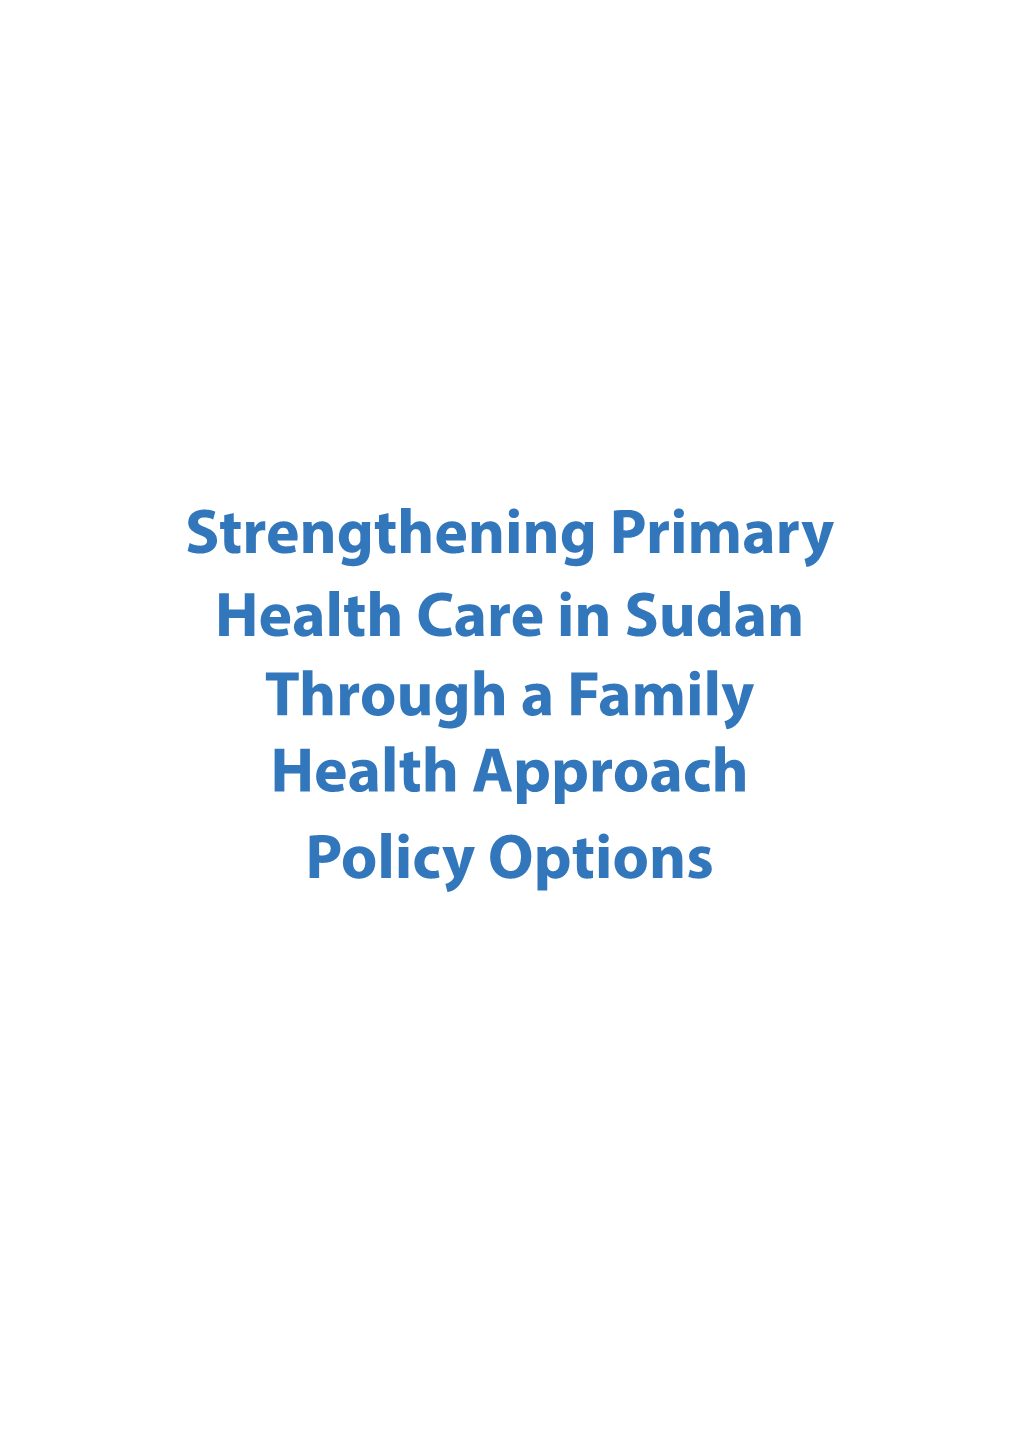 Strengthening Primary Health Care in Sudan Through a Family Health Approach Policy Options Copyright © 2016 by Public Health Institute All Rights Reserved